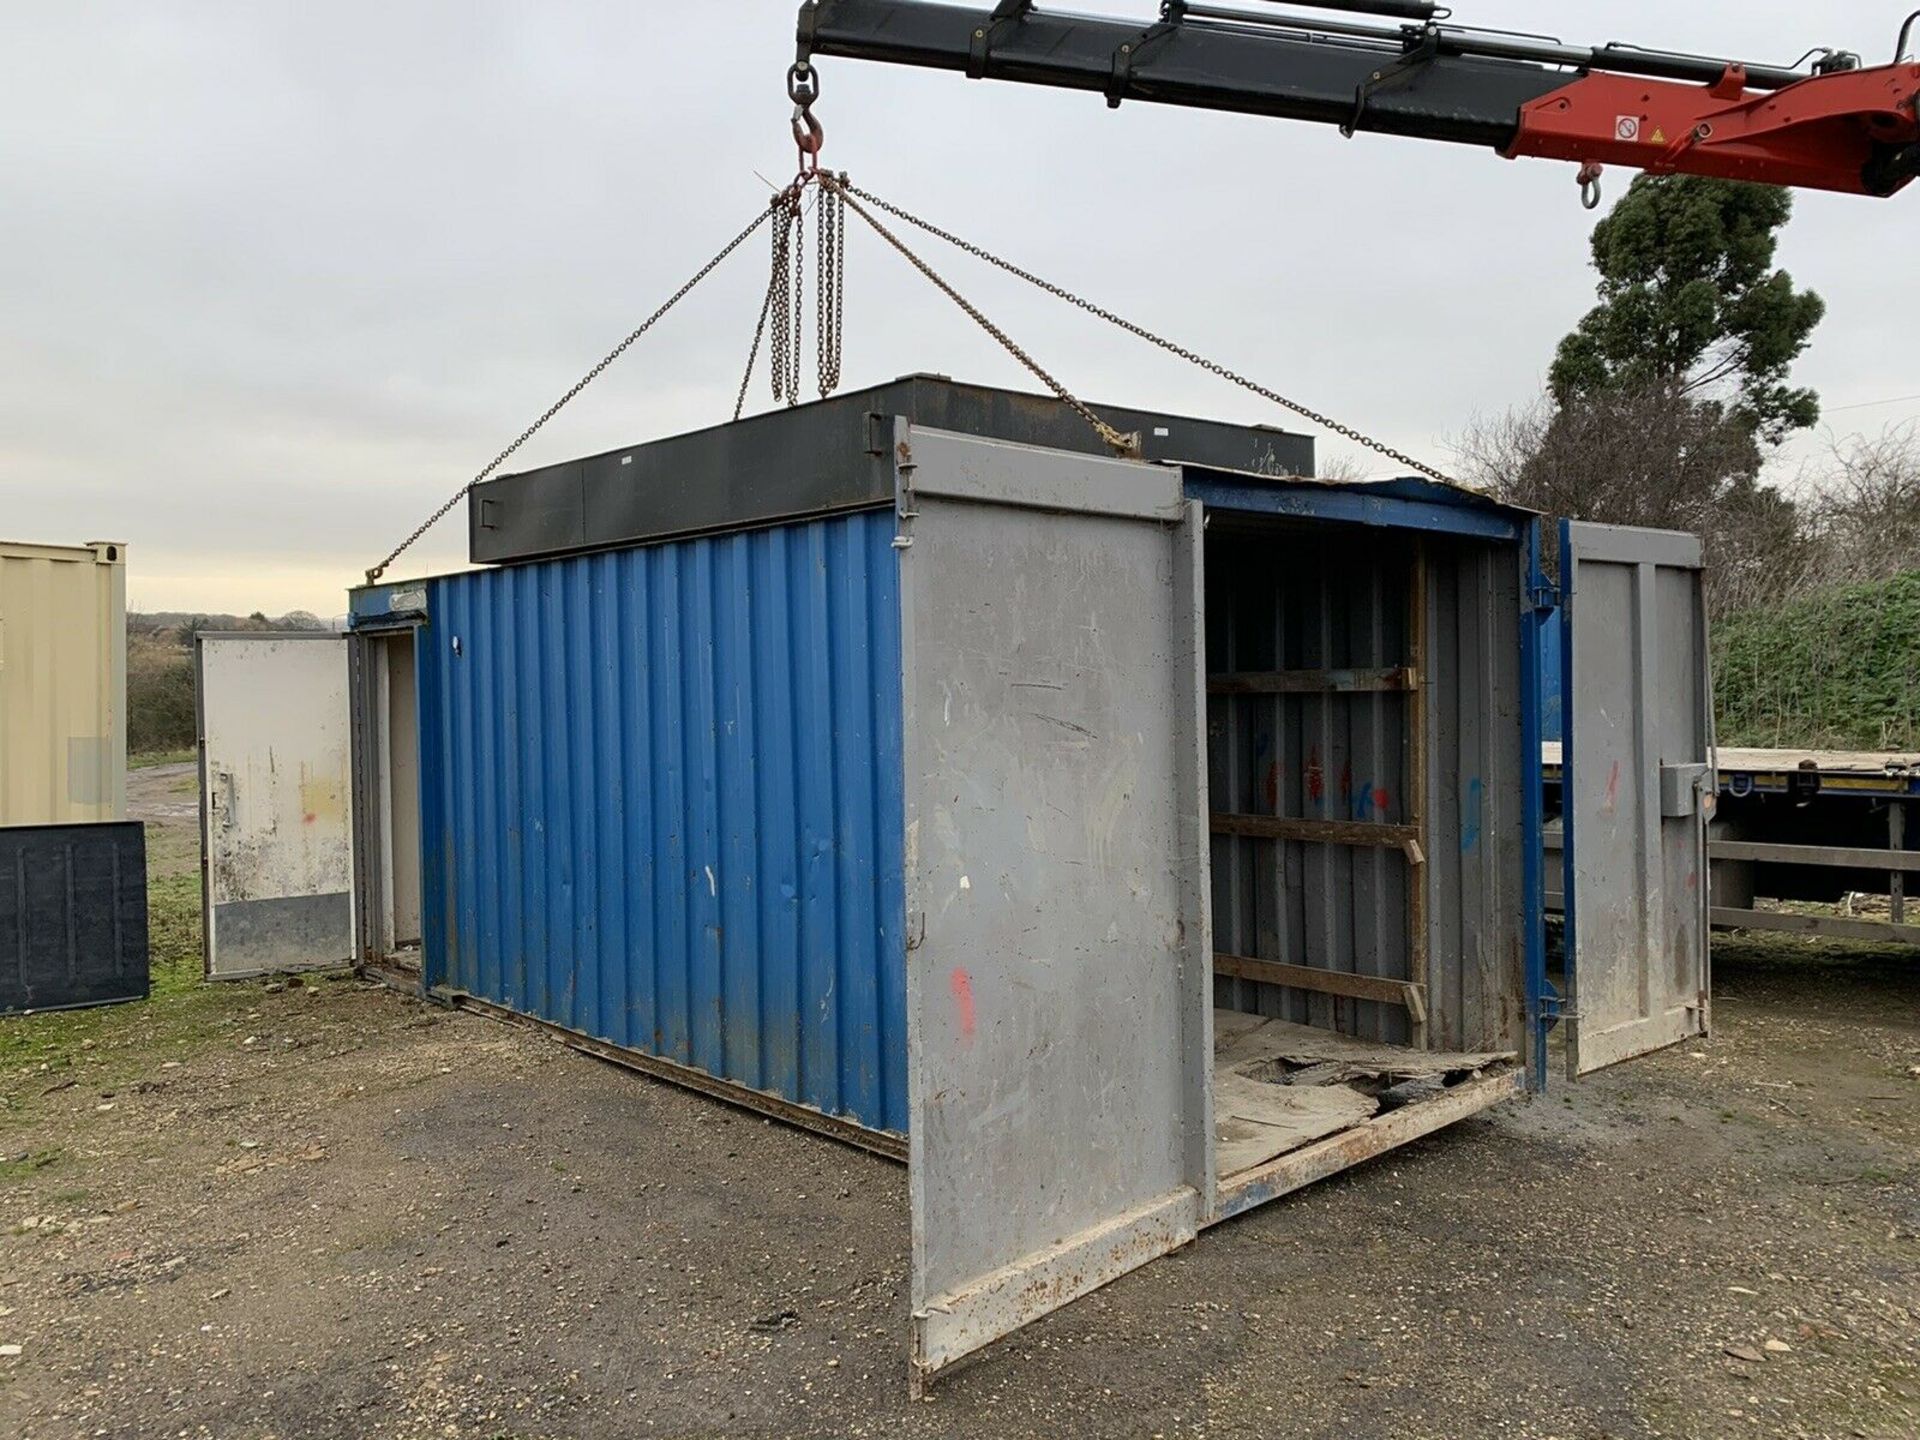 Office / Storage Container Anti Vandal Steel Portable Building 20ft x 8ft - Image 2 of 11